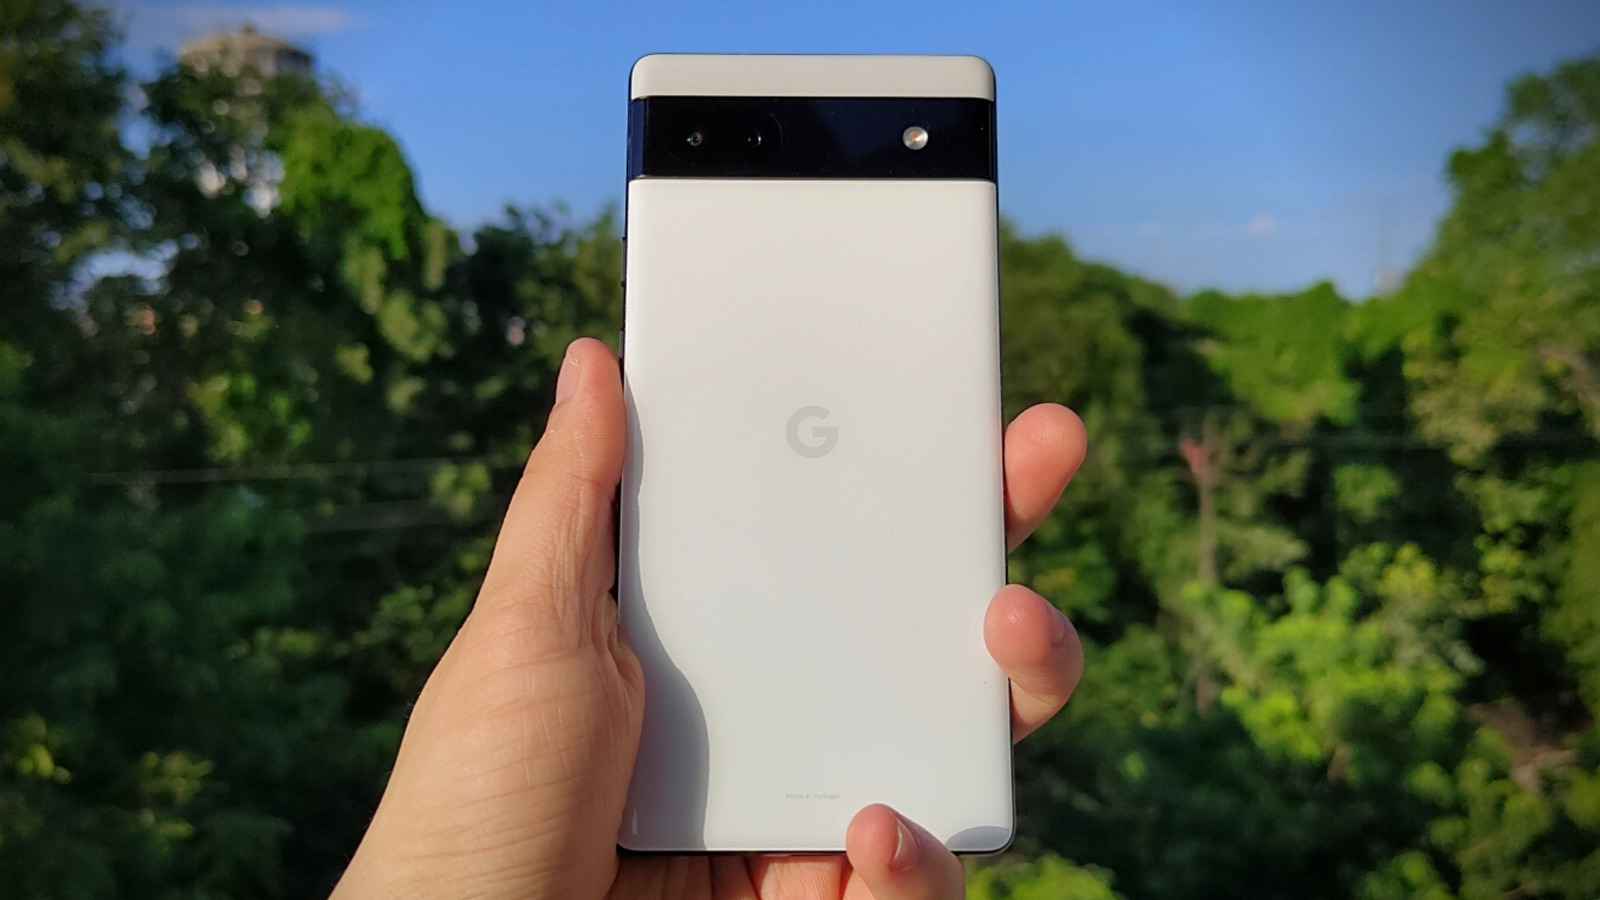 Why Your Google Pixel Camera Isnt Working, And How To Fix It